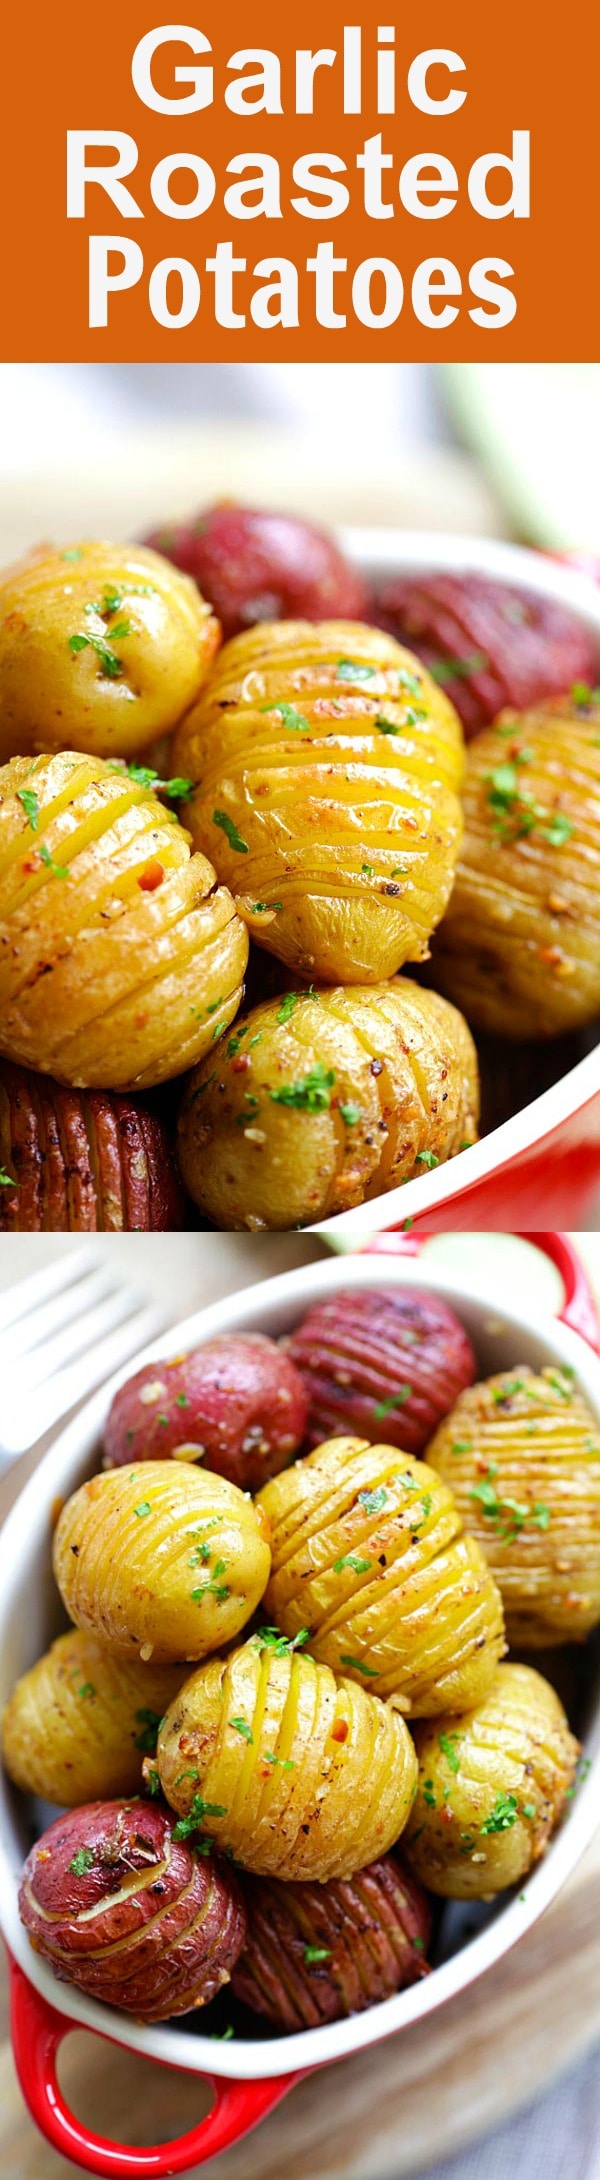 Garlic Roasted Potatoes - quick, easy, the best roasted potatoes with garlic, butter and olive oil. This is one of the best potato recipes in oven | rasamalaysia.com